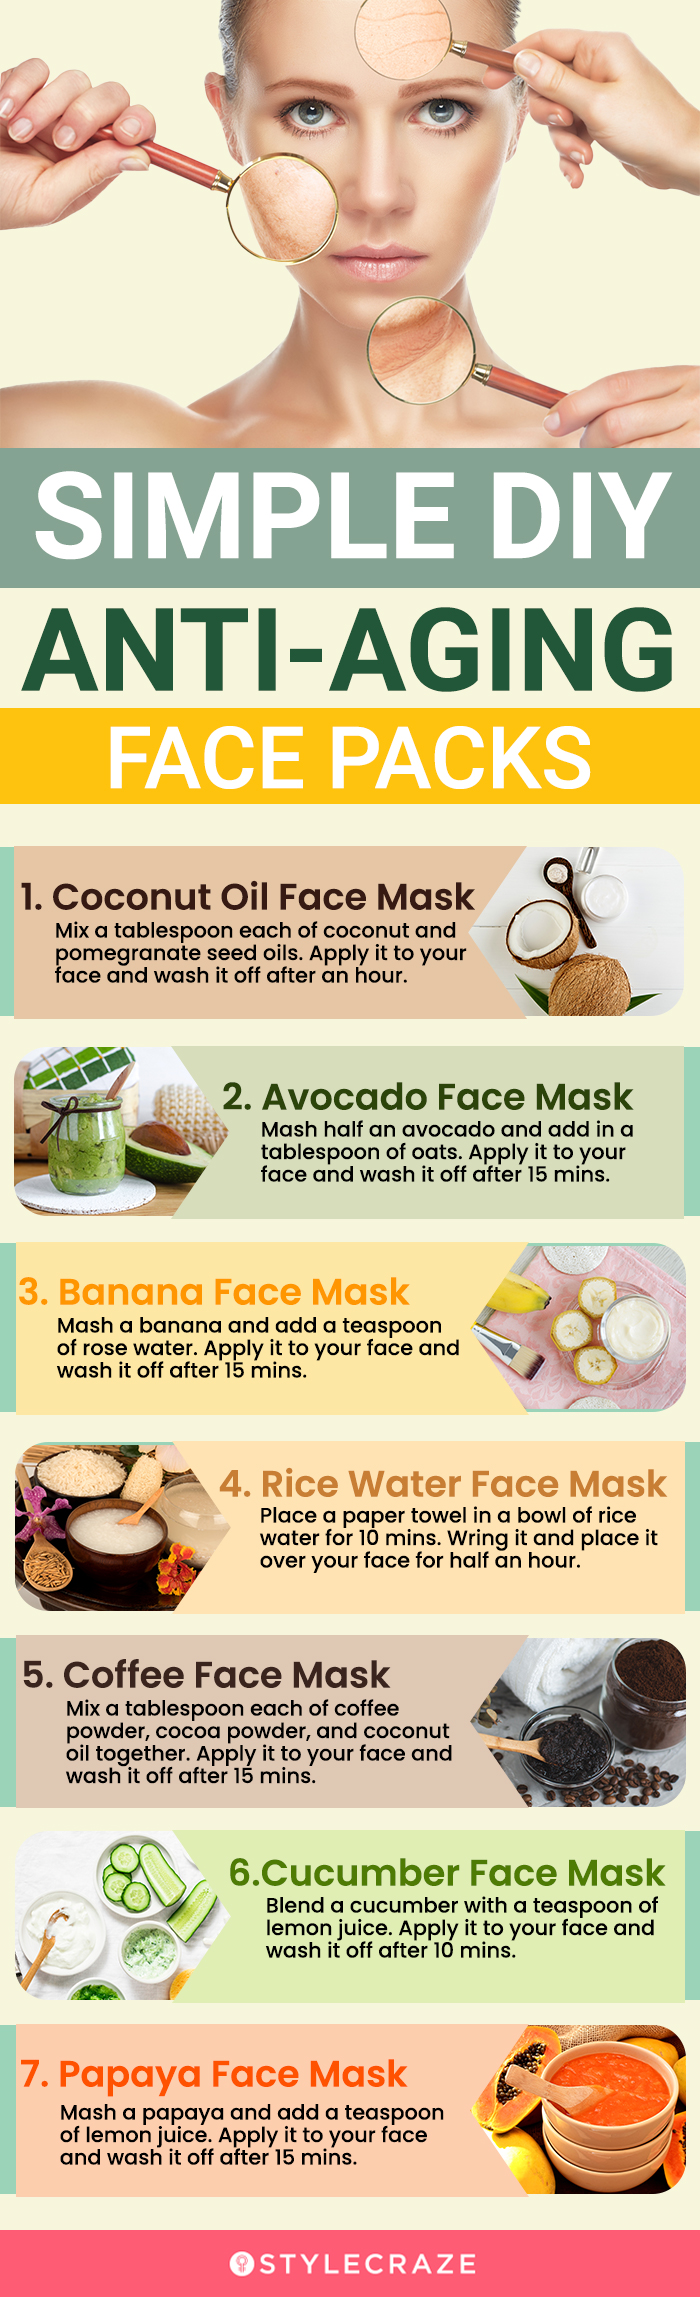 simple diy anti aging face packs (infographic)